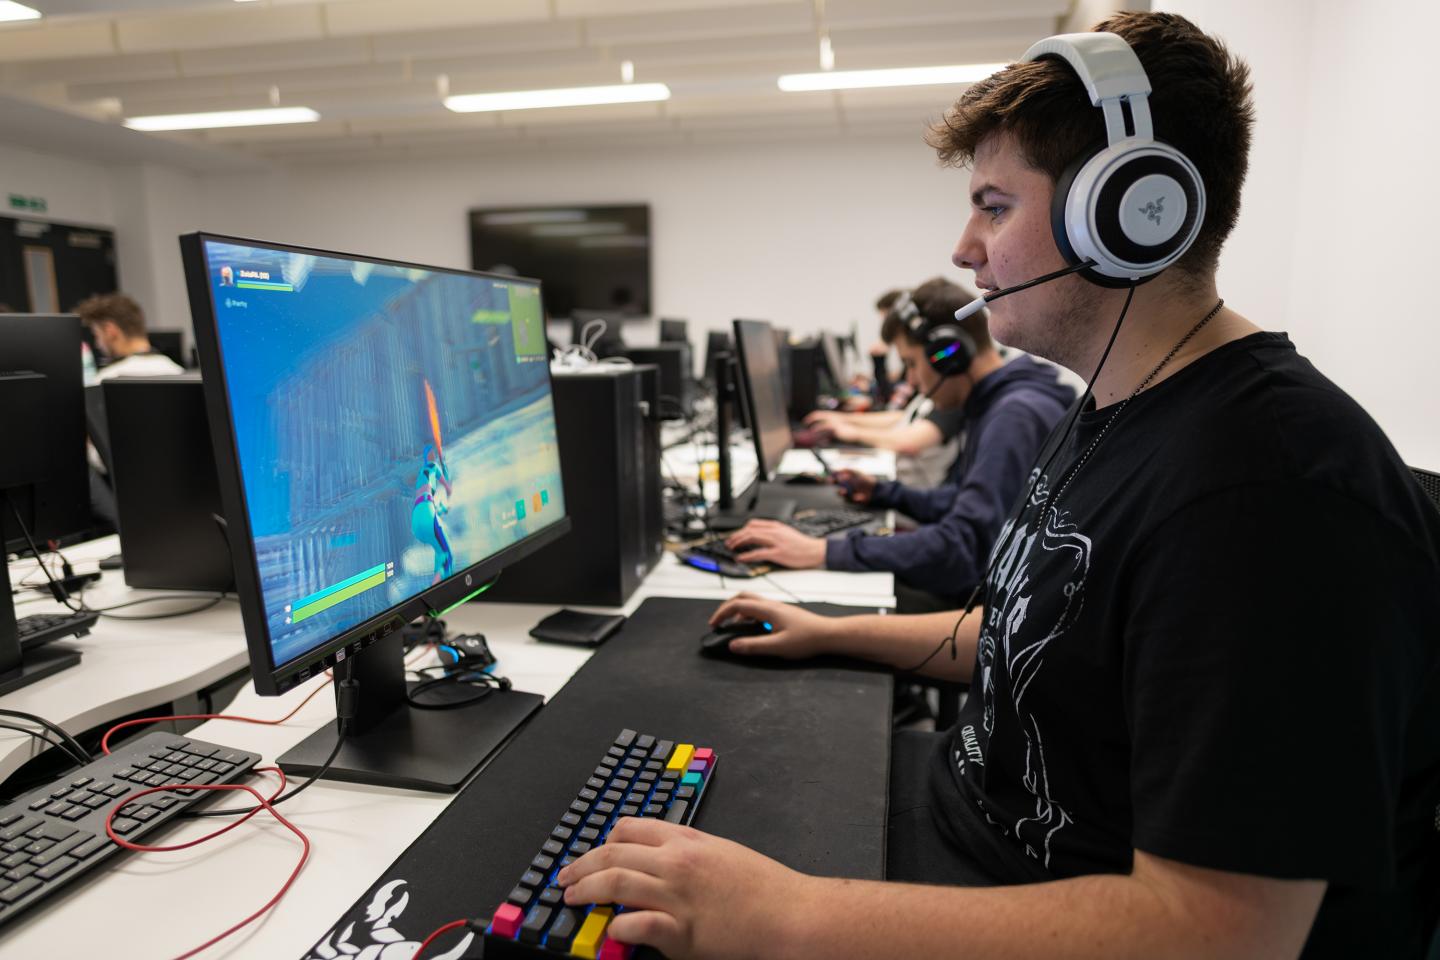 New esports study to investigate mental health of gamers